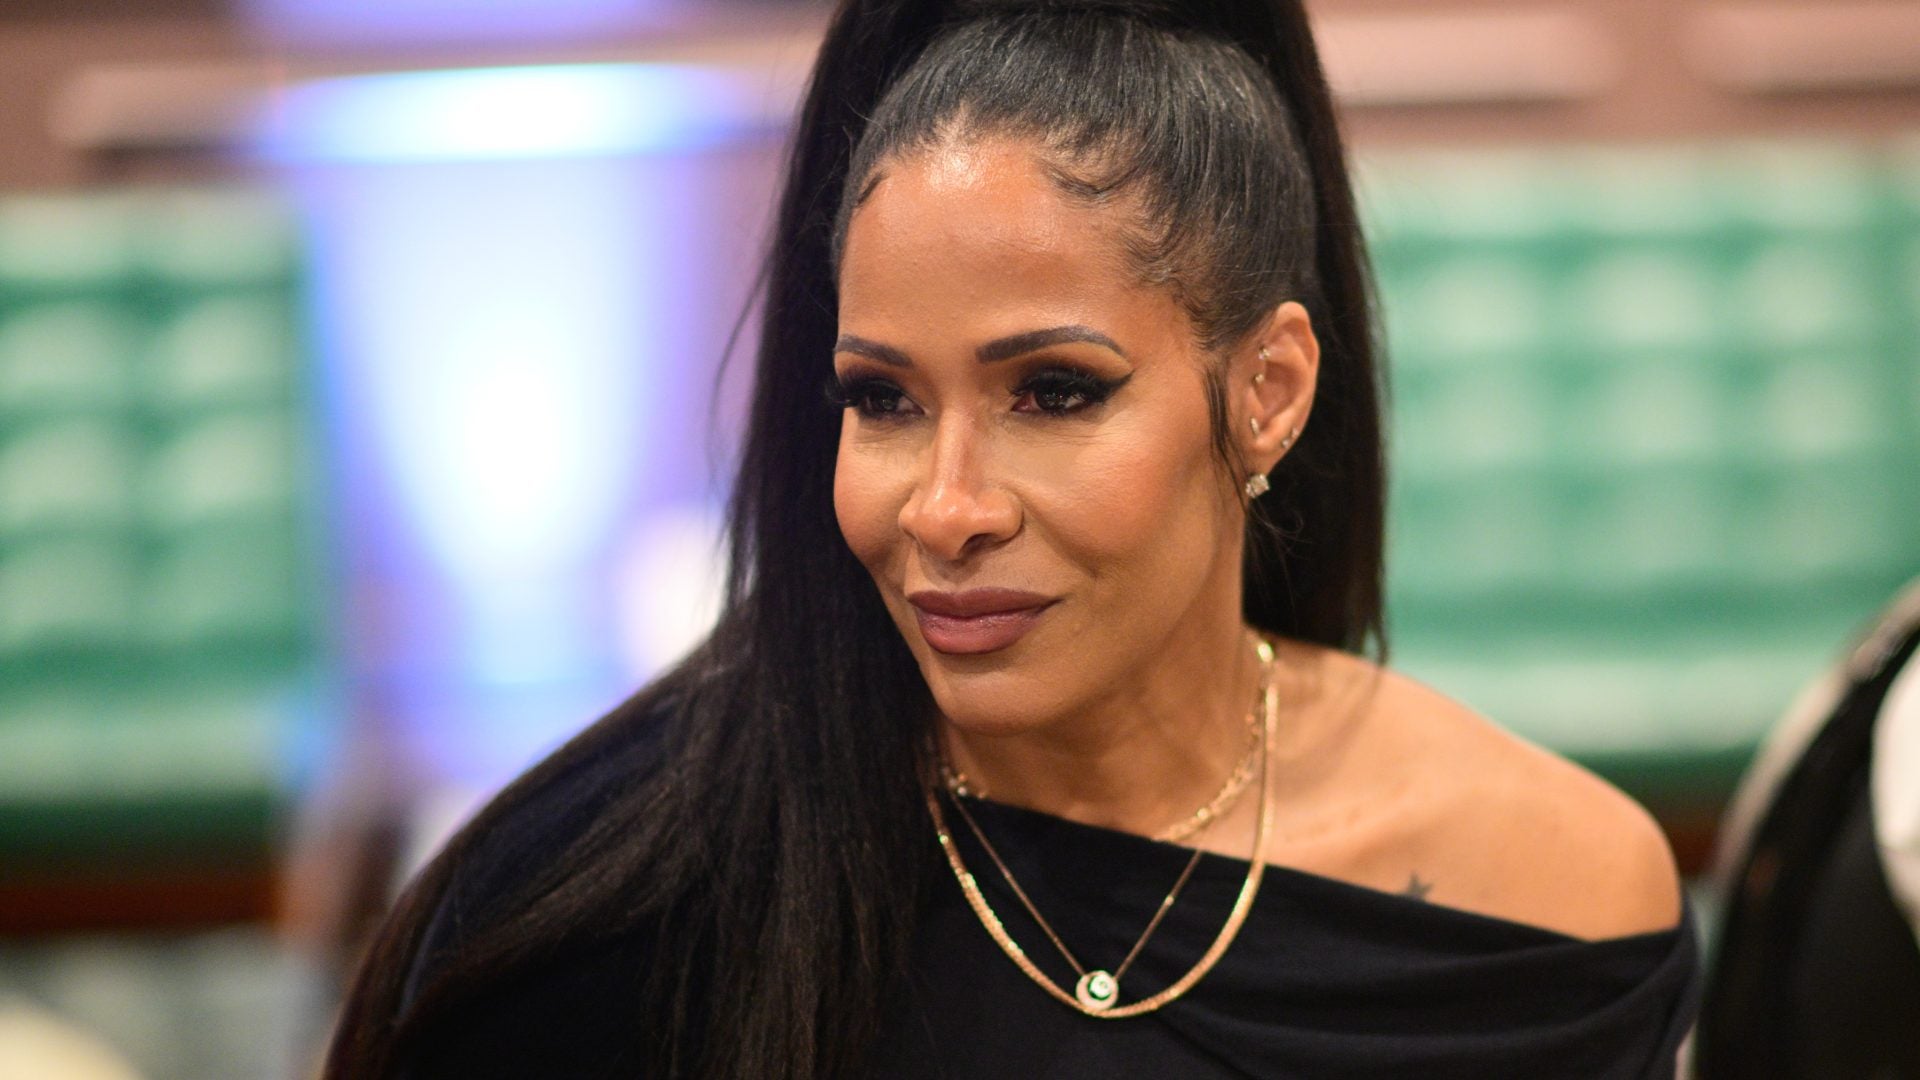 Shereé Whitfield On Joining The 'Glamma' Club, Dating Martell Holt And The Secret To Staying Fine At 53